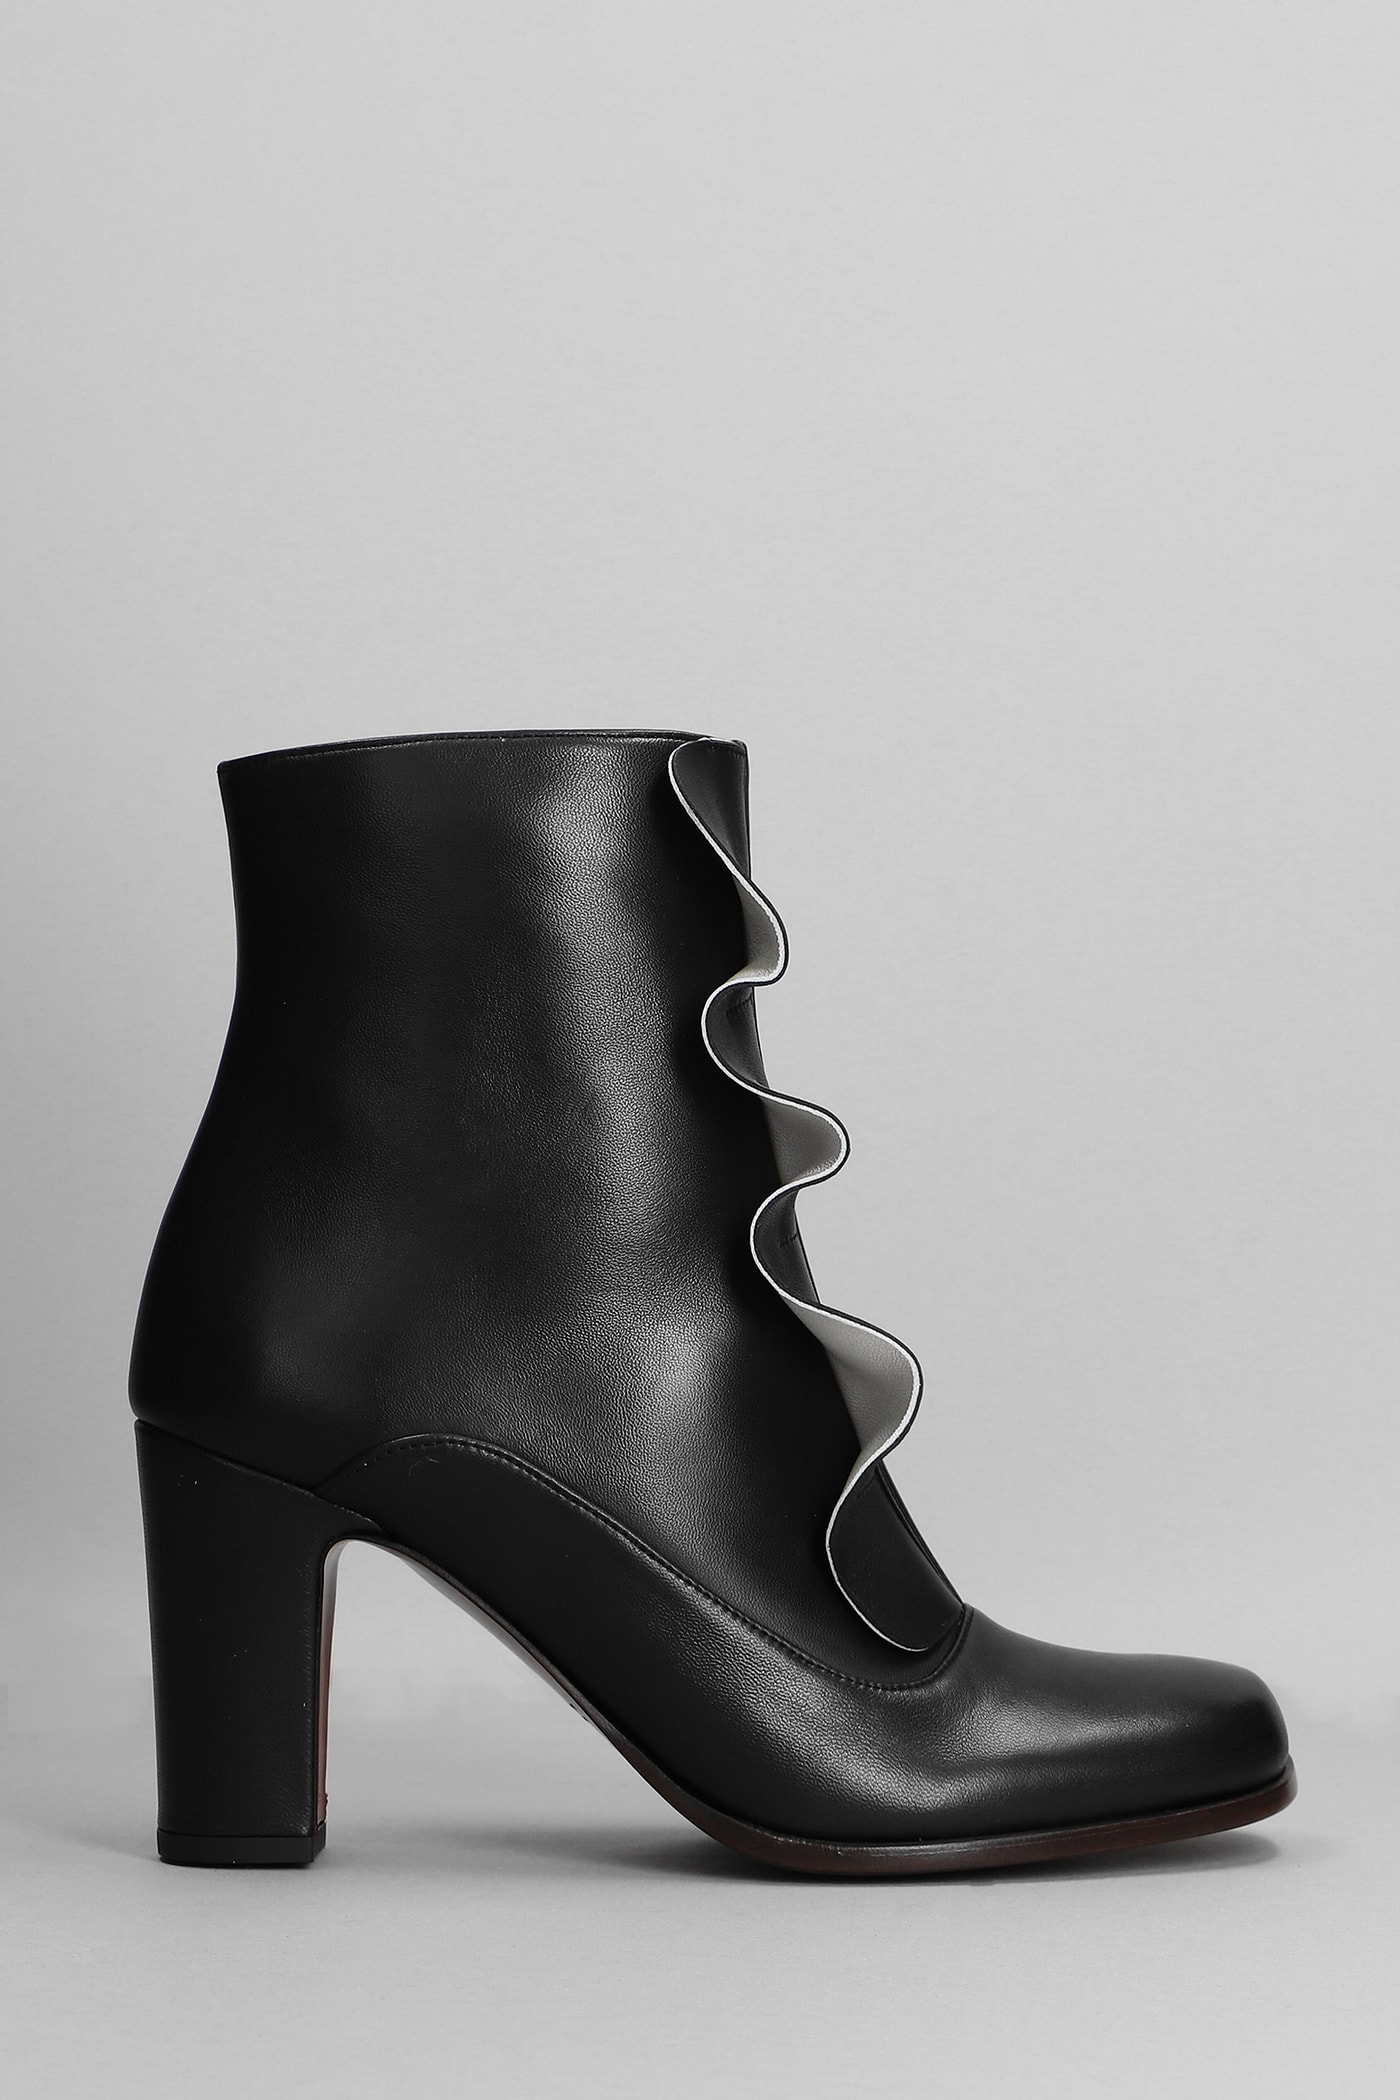 Chie Mihara Fapico High Heels Ankle Boots In Black Leather